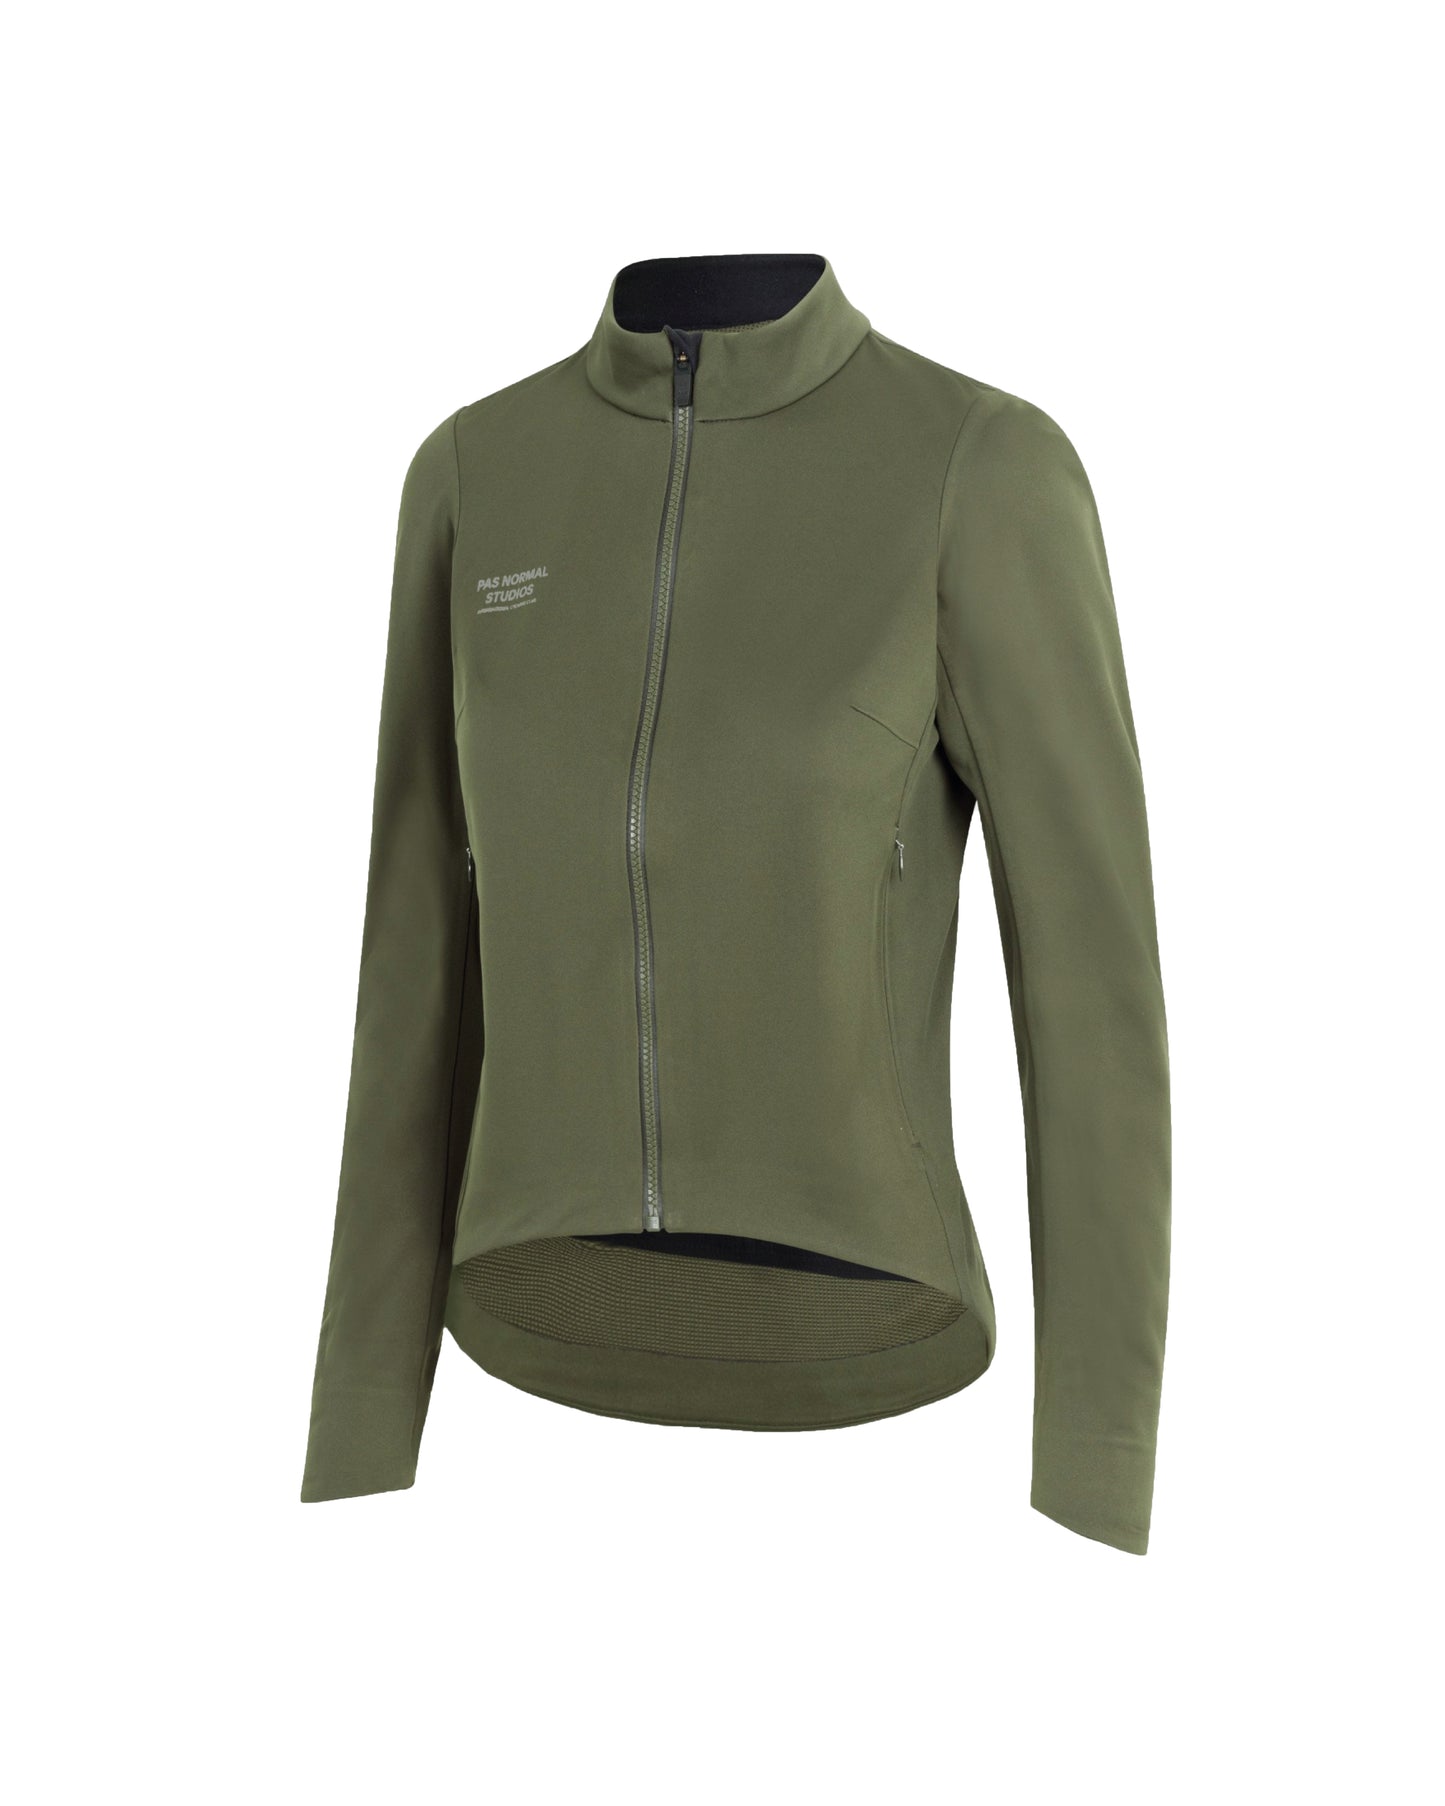 PAS NORMAL STUDIOS Essential Thermal Chaqueta Chica AW22 - Olive